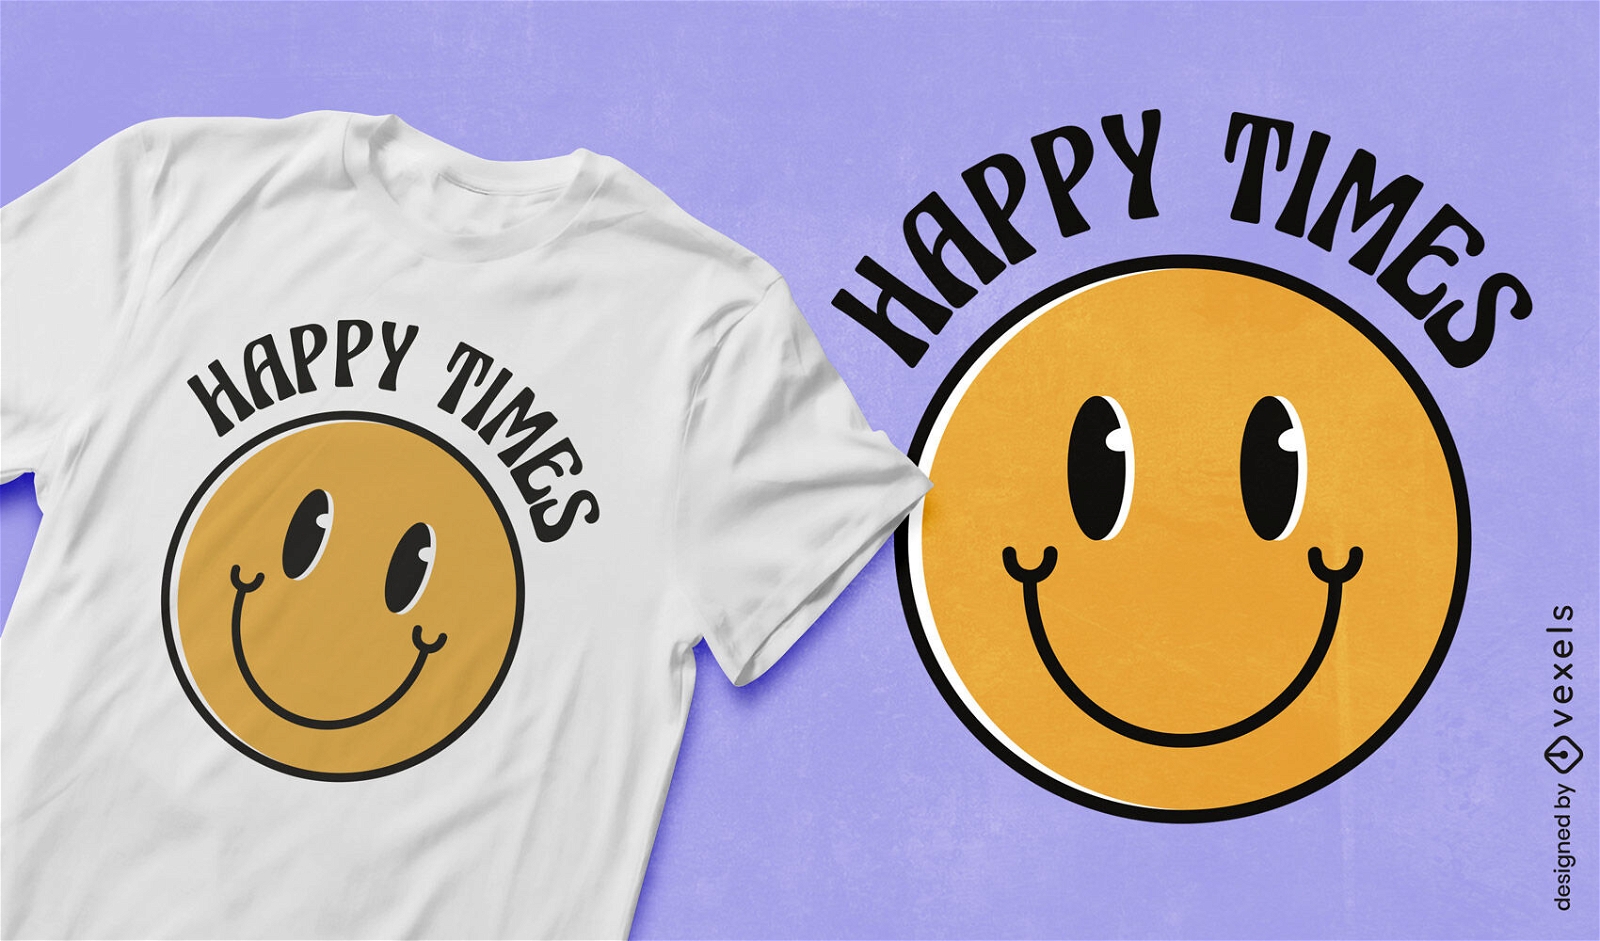 Smiley face happy times t-shirt design